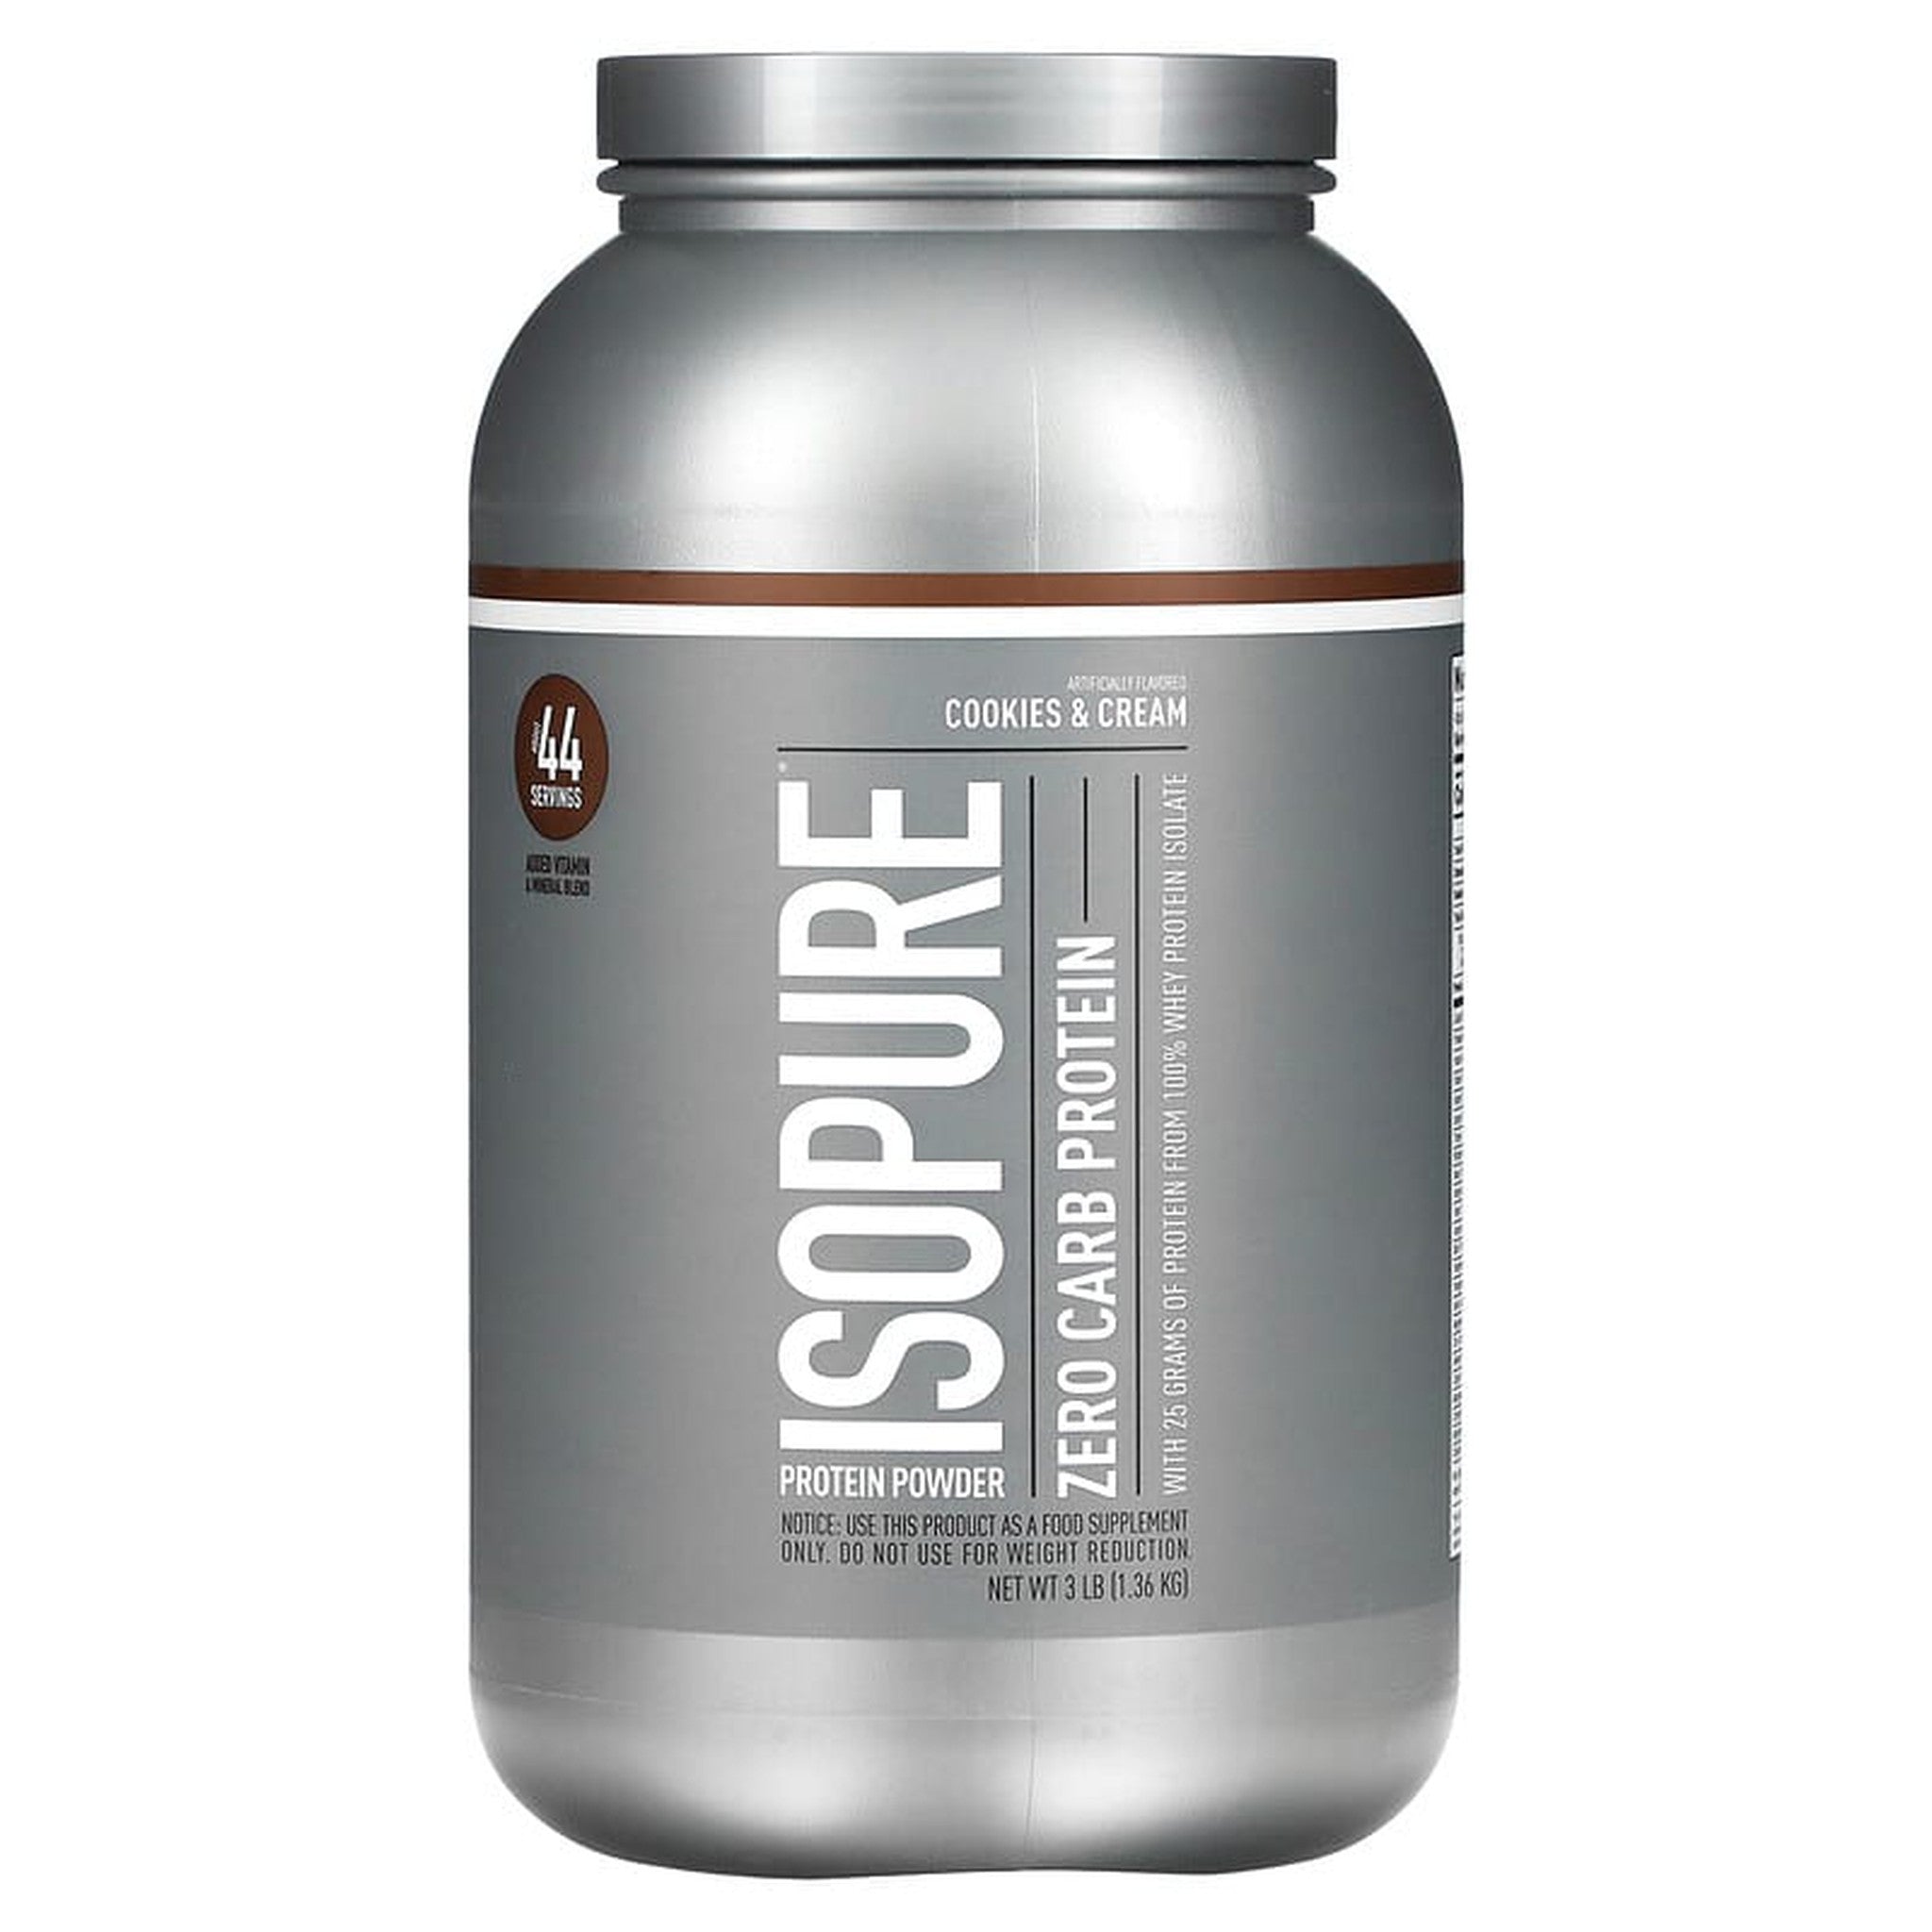 Nature's Best Isopure Low Carb - 3 lb - Ultimate Sport Nutrition